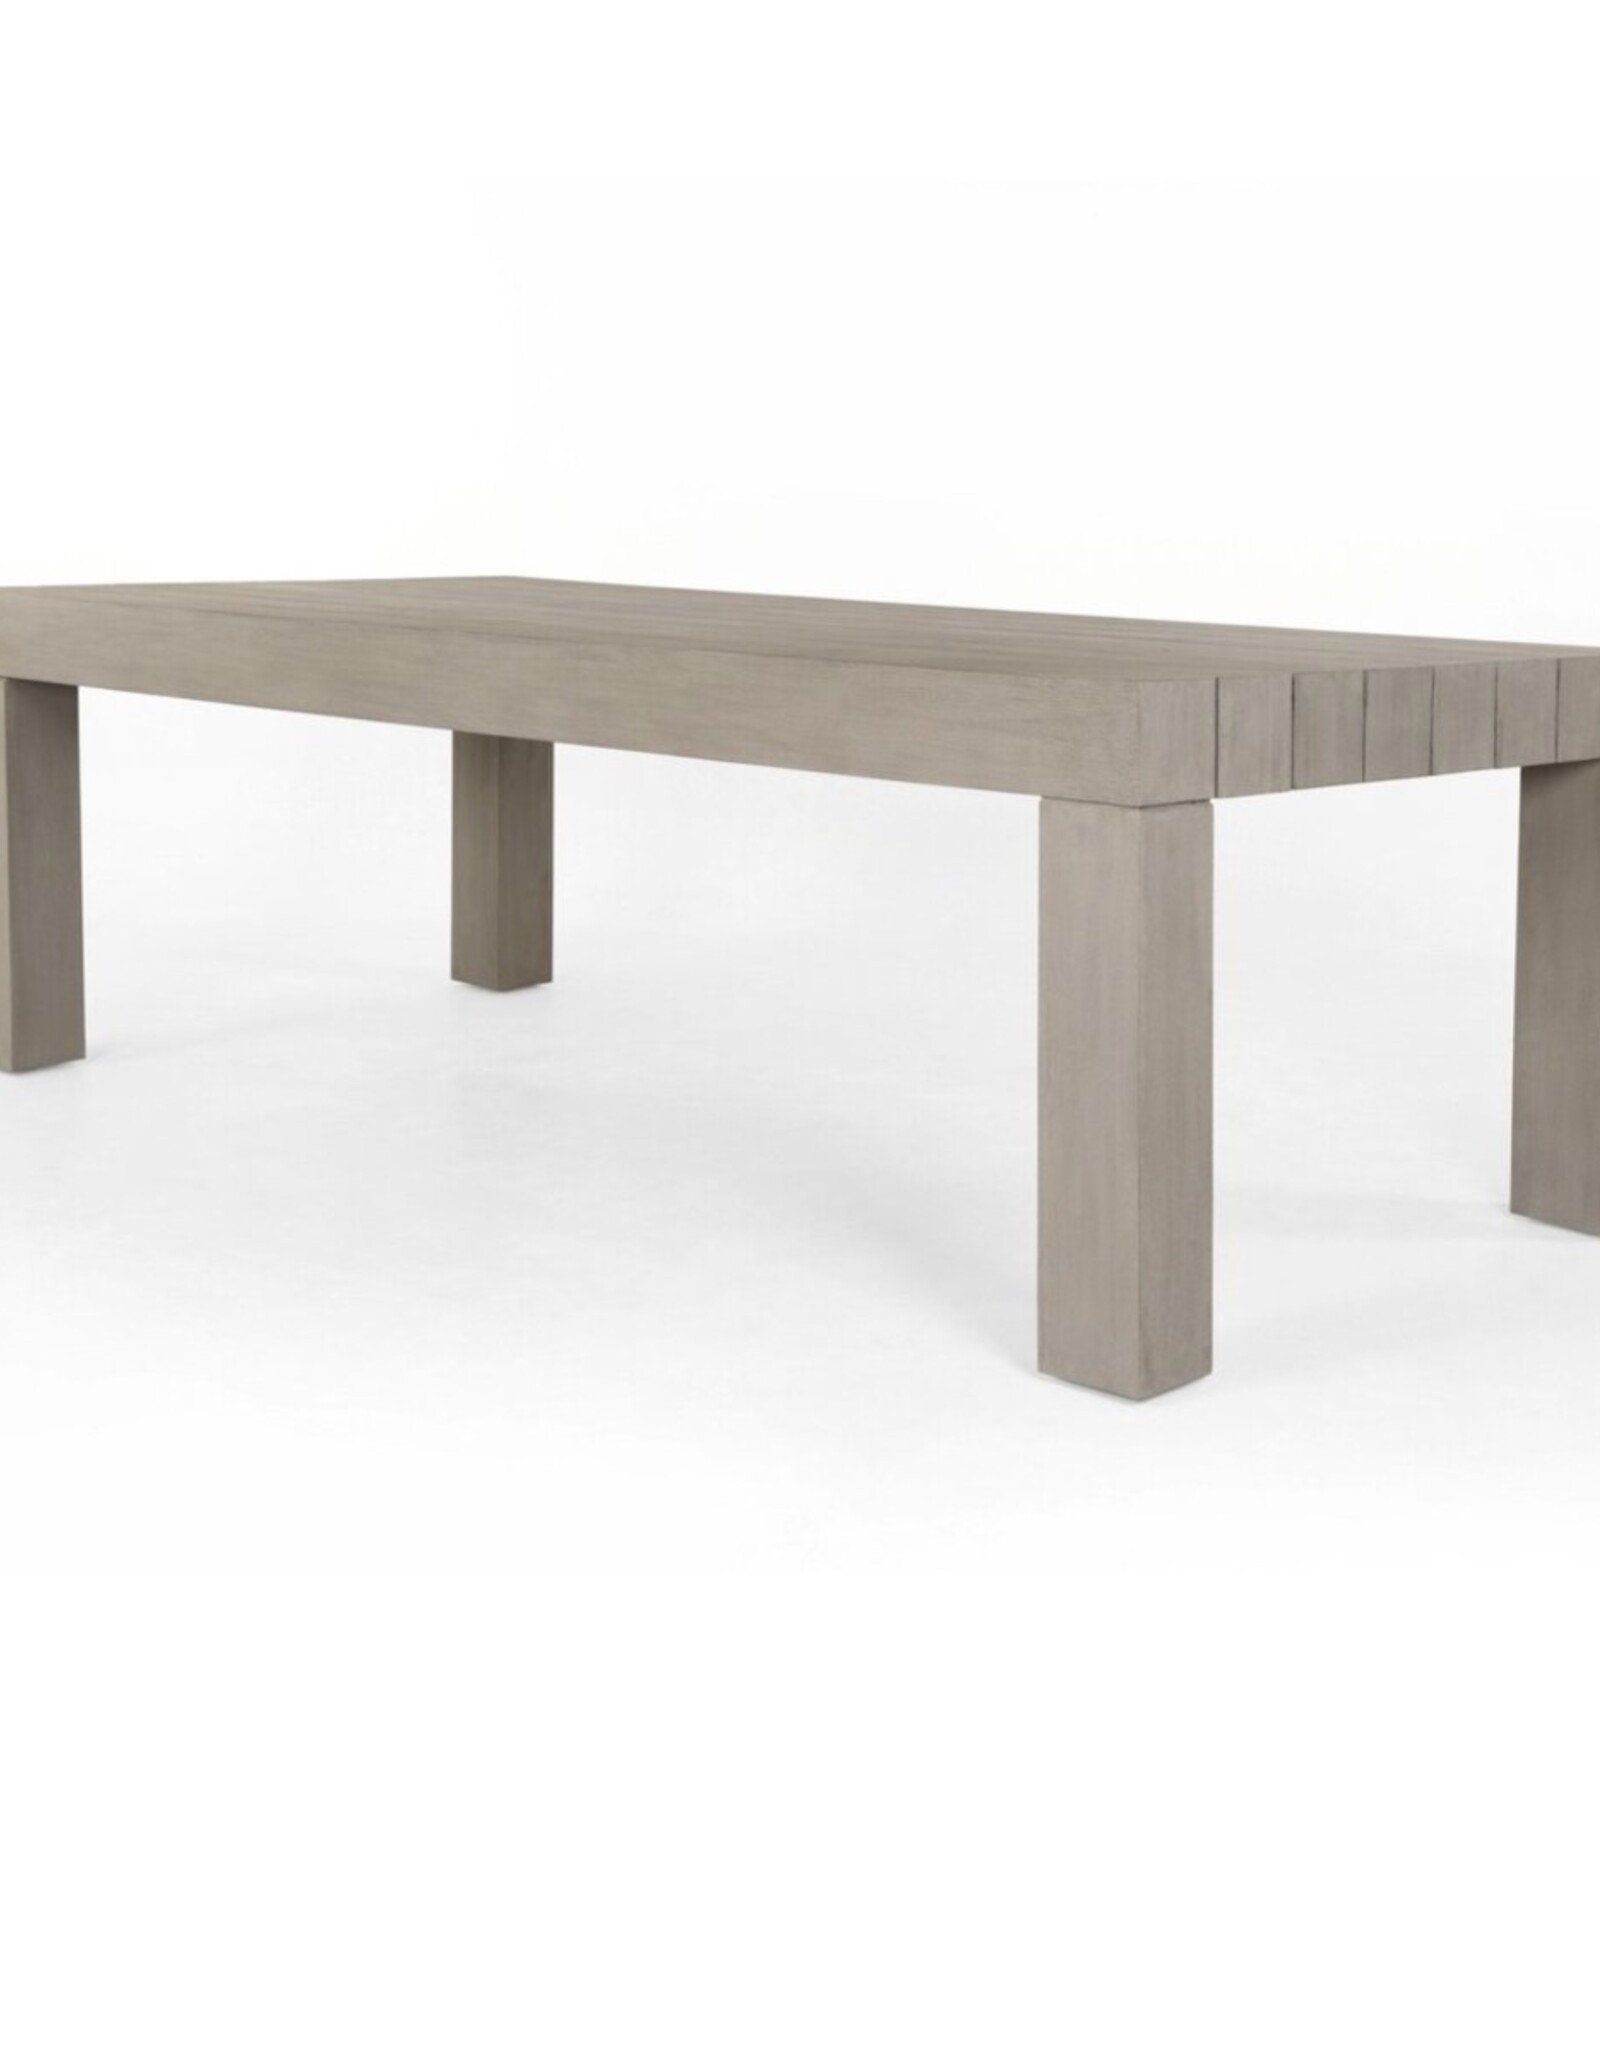 Sonora Outdoor Dining Table Weathered Grey